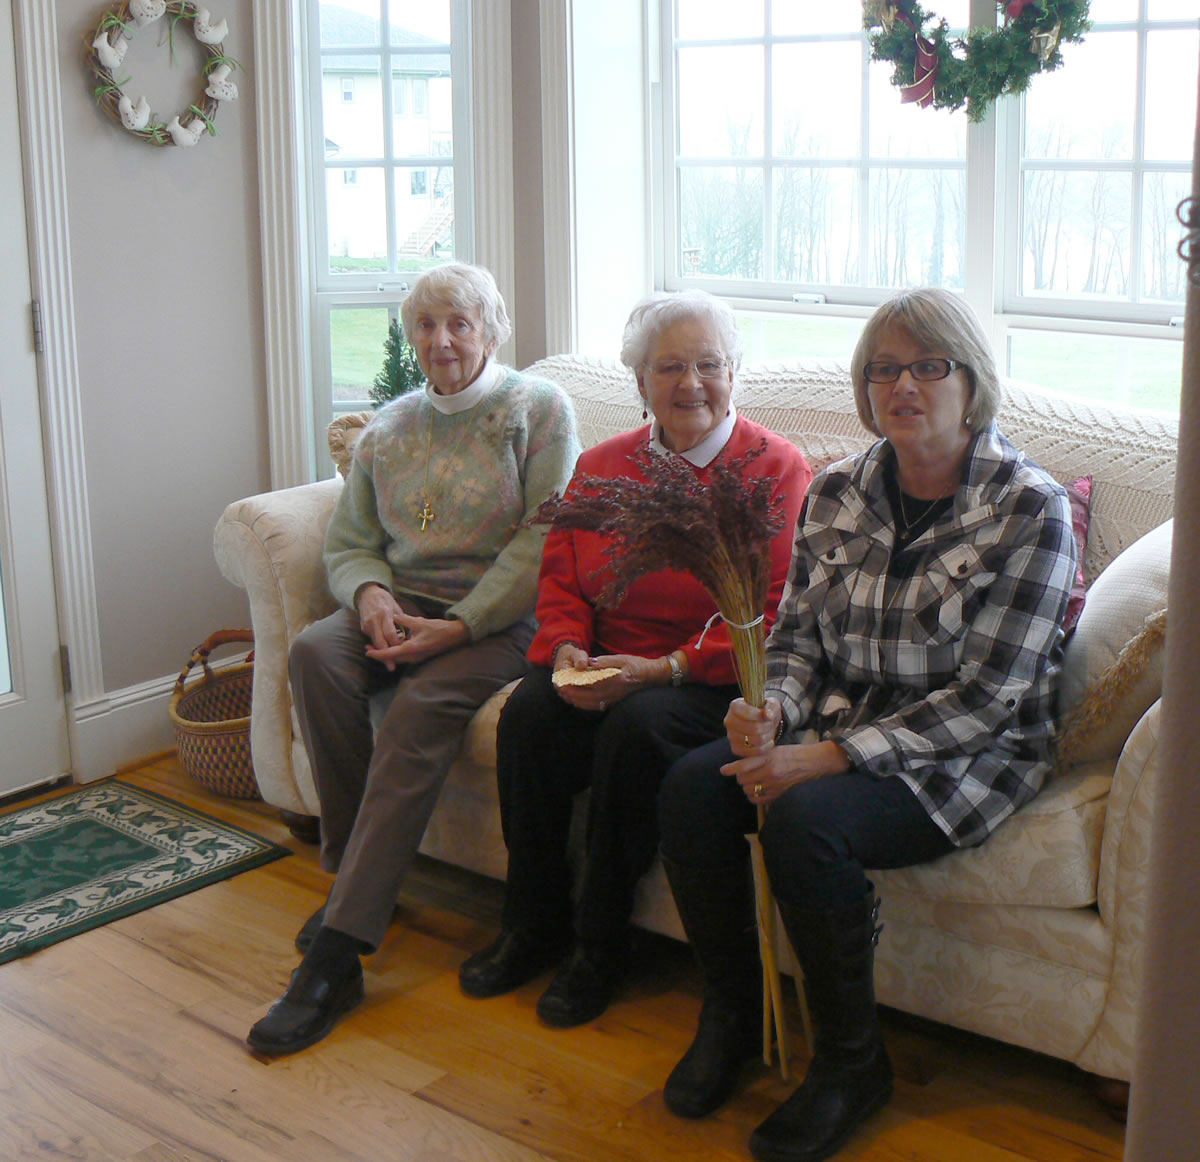 Phyllis Vidin
Pat Hogan, from left, Jeanette Claiborne and Kathy Wofford attended the Ridgefield Garden Club's 2011 Christmas Lunch. The club marks its 75th year today at the Ridgefield Heritage Celebration.